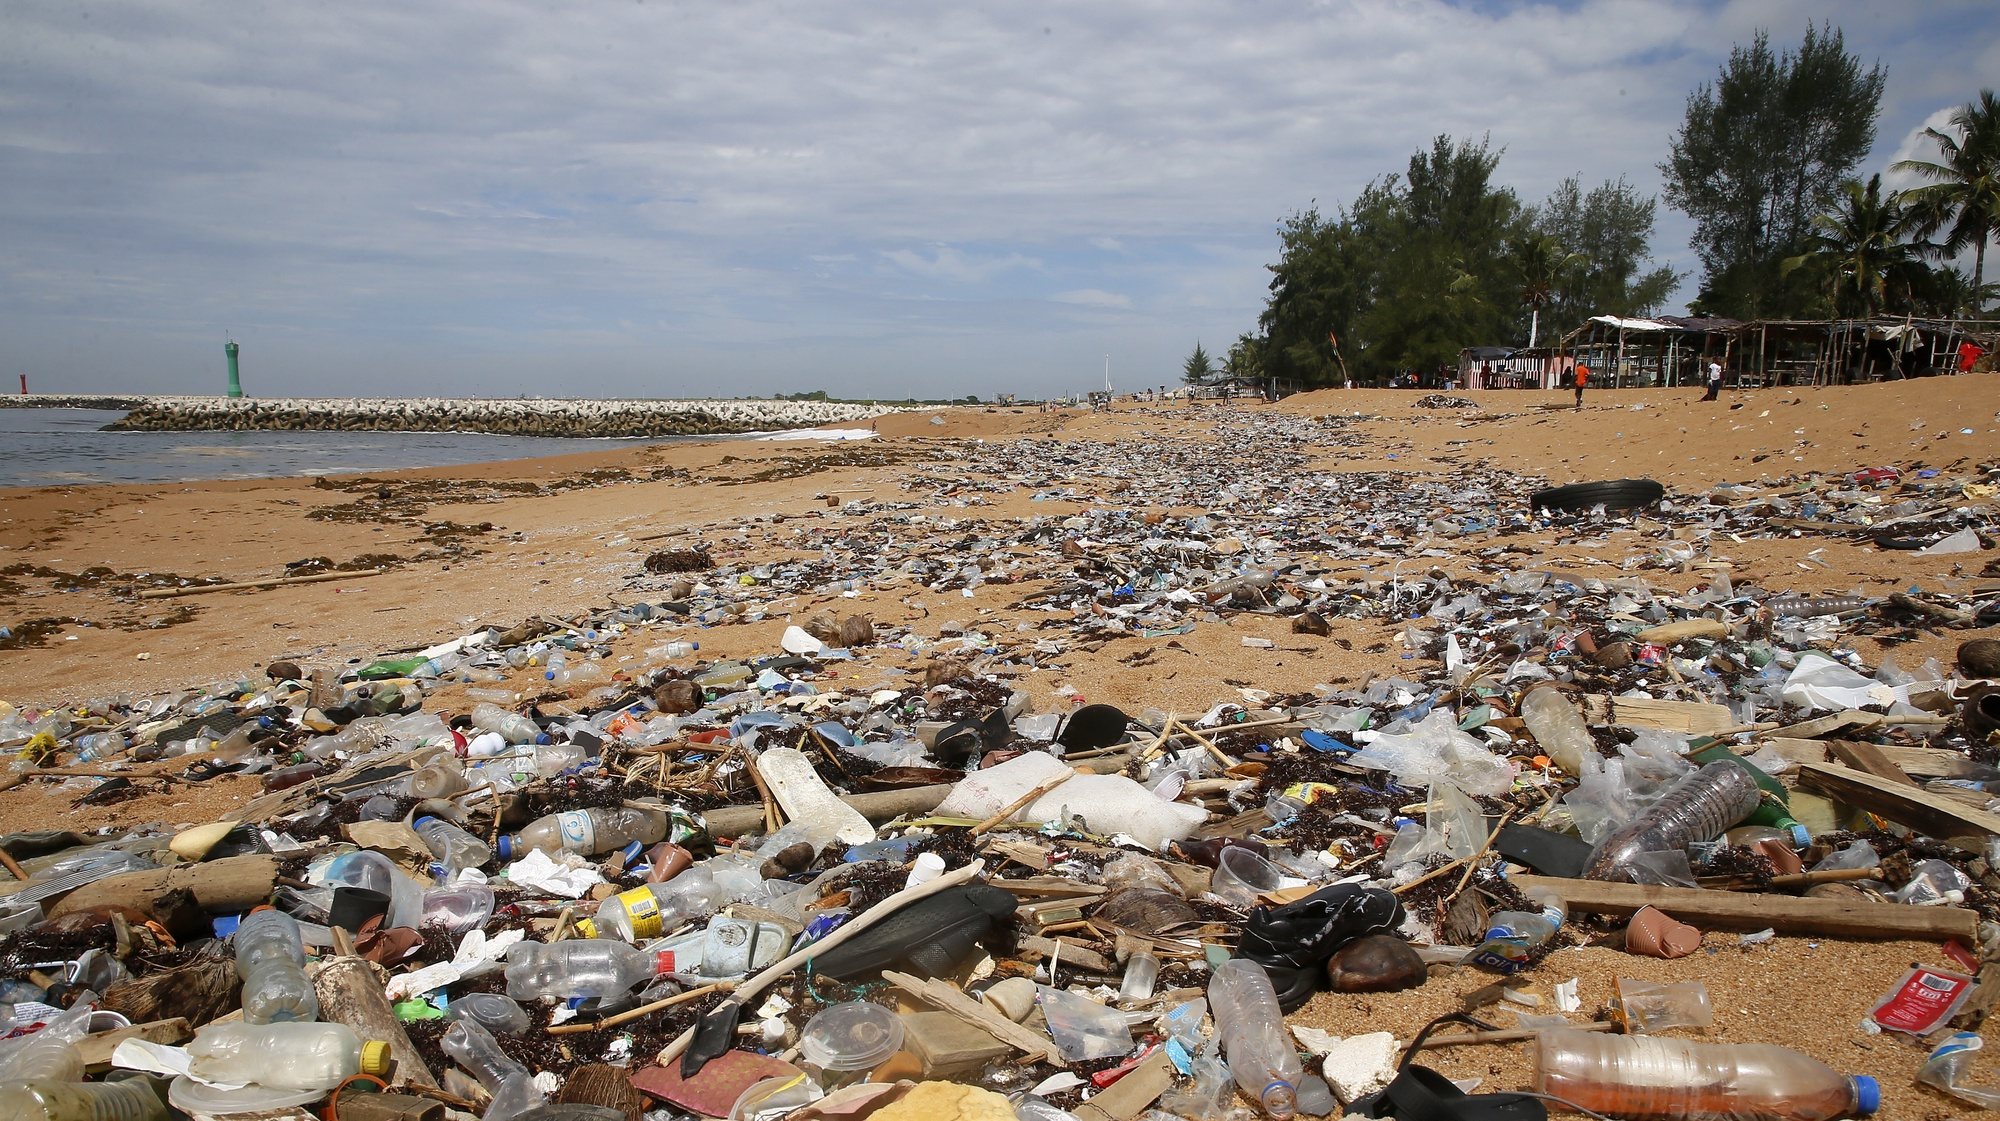 epa09995806 A general view of plastic debris on Vridi beach, a popular tourist destination in the city of Abidjan, Ivory Coast, 04 June 2022, a day before World Environment Day. In 1972, the United Nations General Assembly designated 05 June as World Environment Day (WED). The first celebration, under the slogan &#039;One Planet Earth&#039;, took place in 1974. Over the years, the World Environment Day has become a global platform facilitating awareness and initiative to respond to urgent challenges, whether it&#039;s marine pollution, global warming, sustainable consumption or wildlife crime. Millions of people have taken part over the years and have helped change our consumption habits, as well as national and international environmental policies.  EPA/LEGNAN KOULA